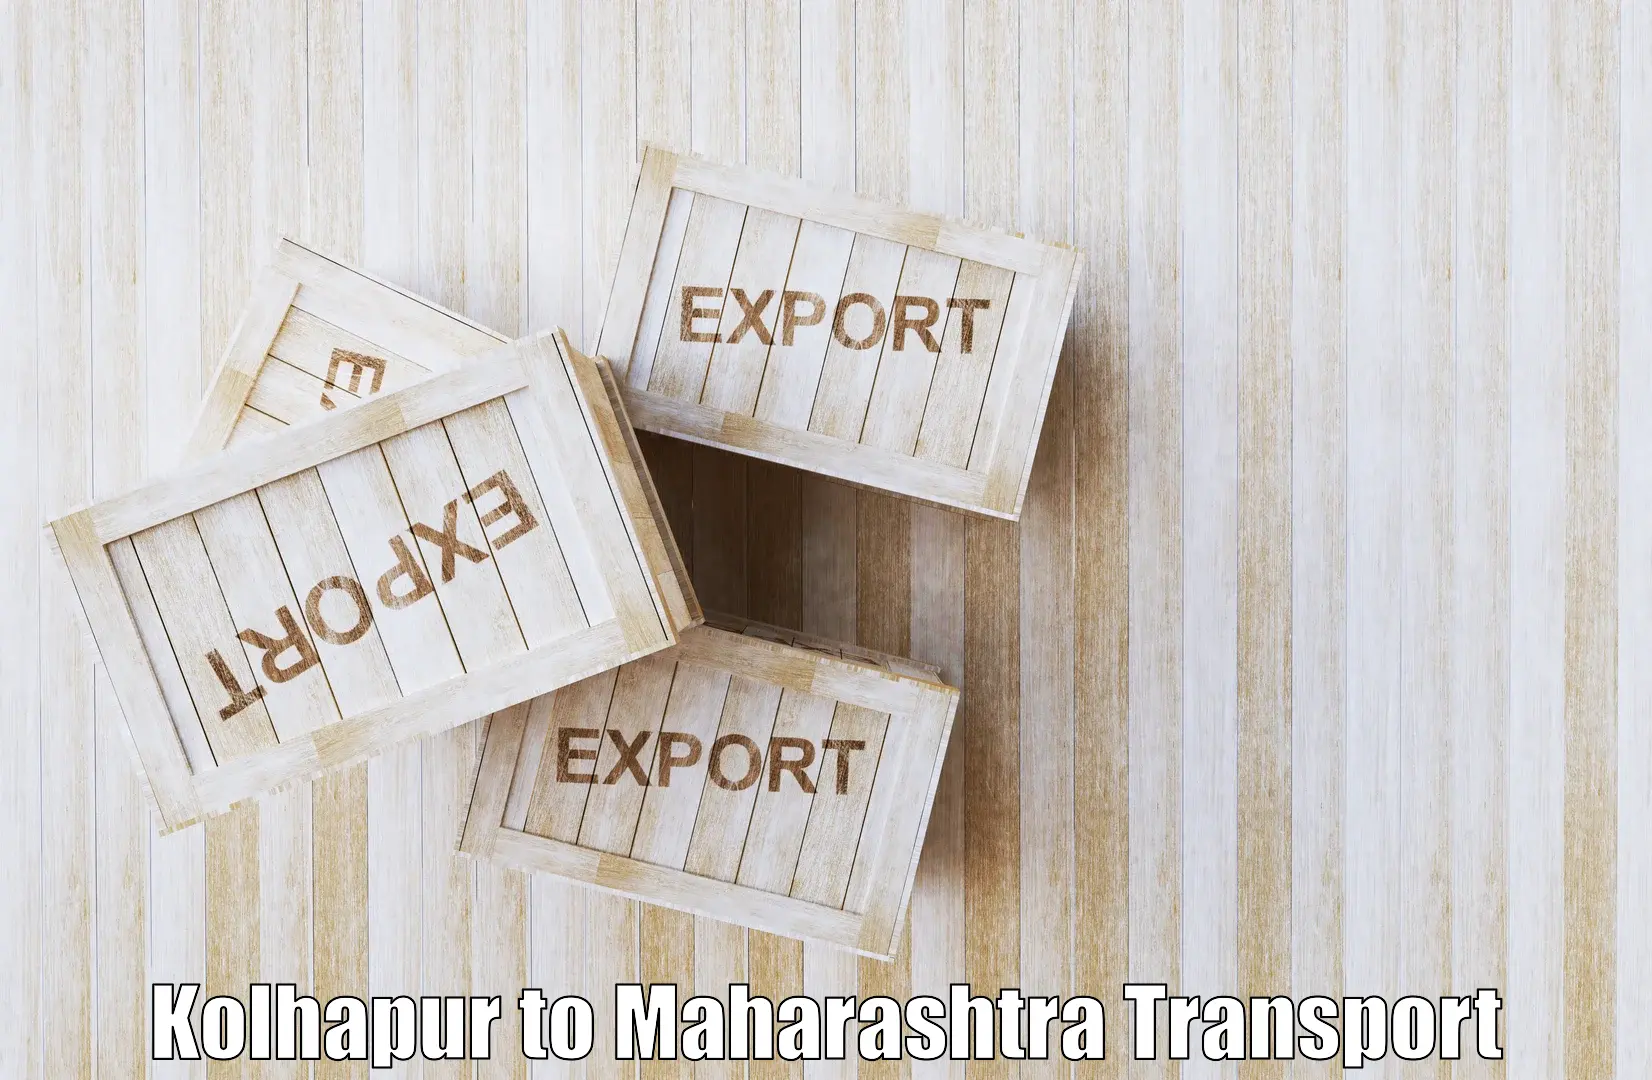 Transport in sharing Kolhapur to Alephata